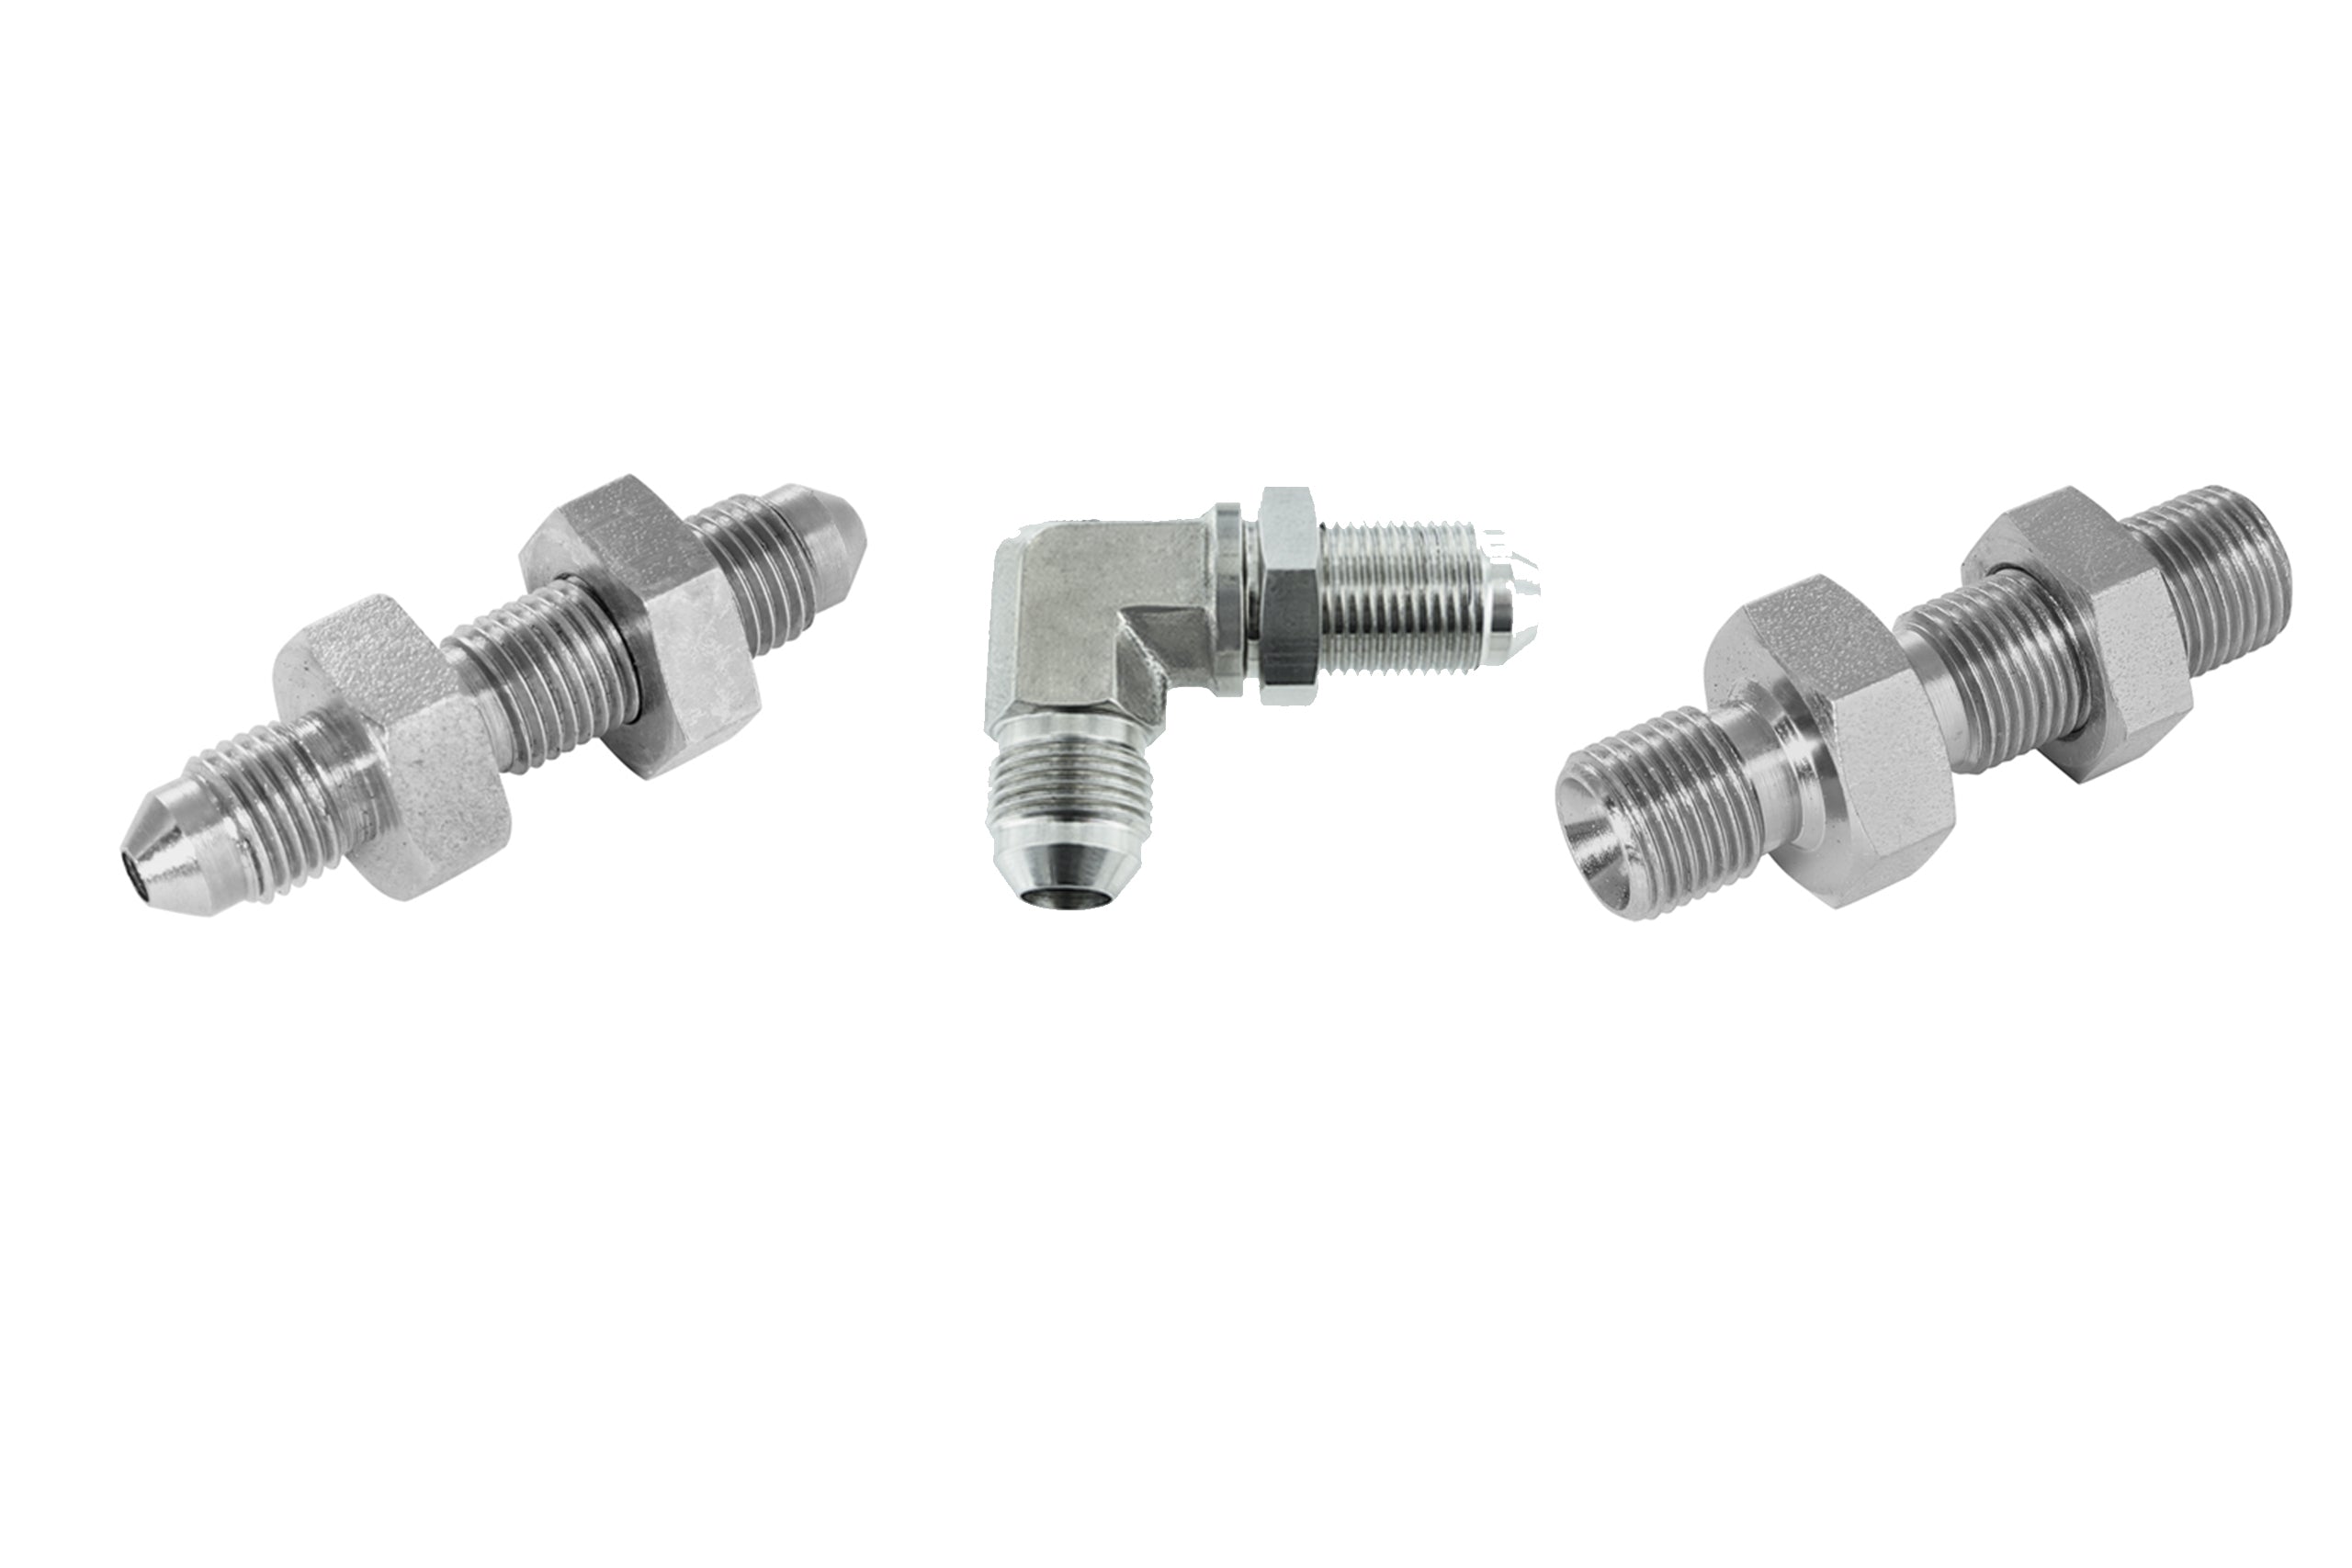 What are Hydraulic Bulkhead Fittings?